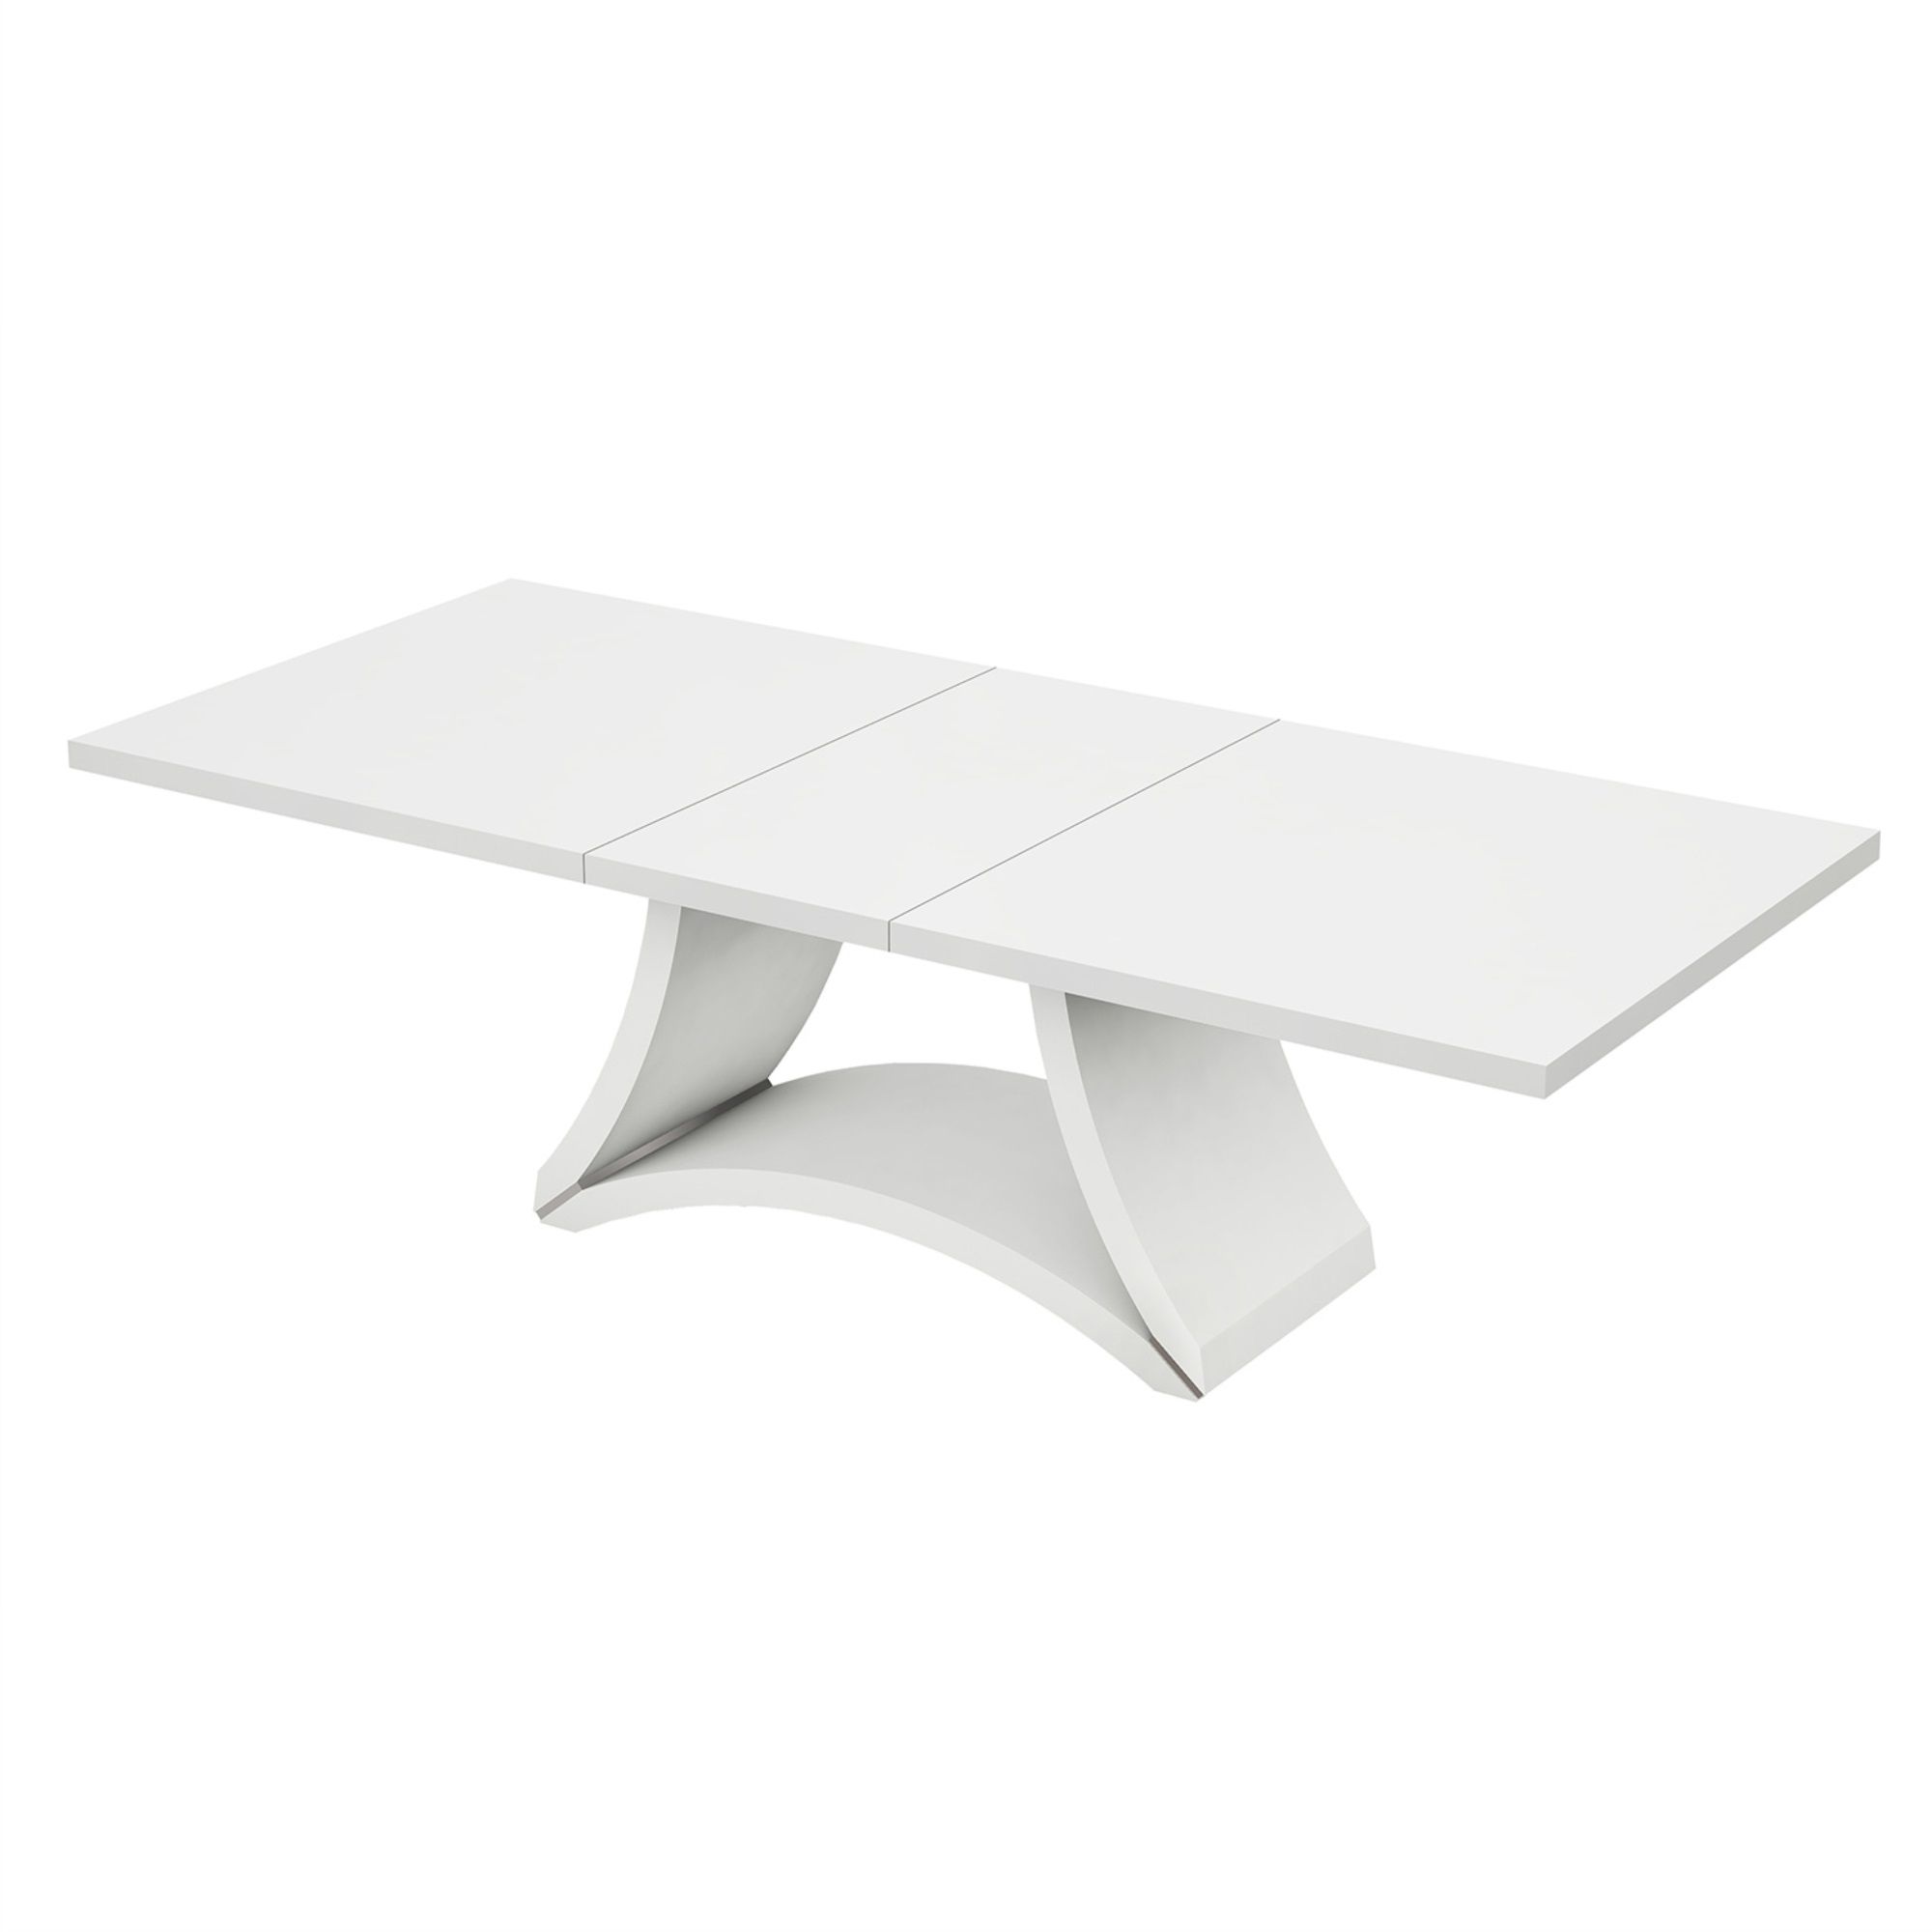 Well Known High Gloss Outdoor Tables Pertaining To Modern White High Gloss Finish Dining Table – Walmart (View 13 of 15)